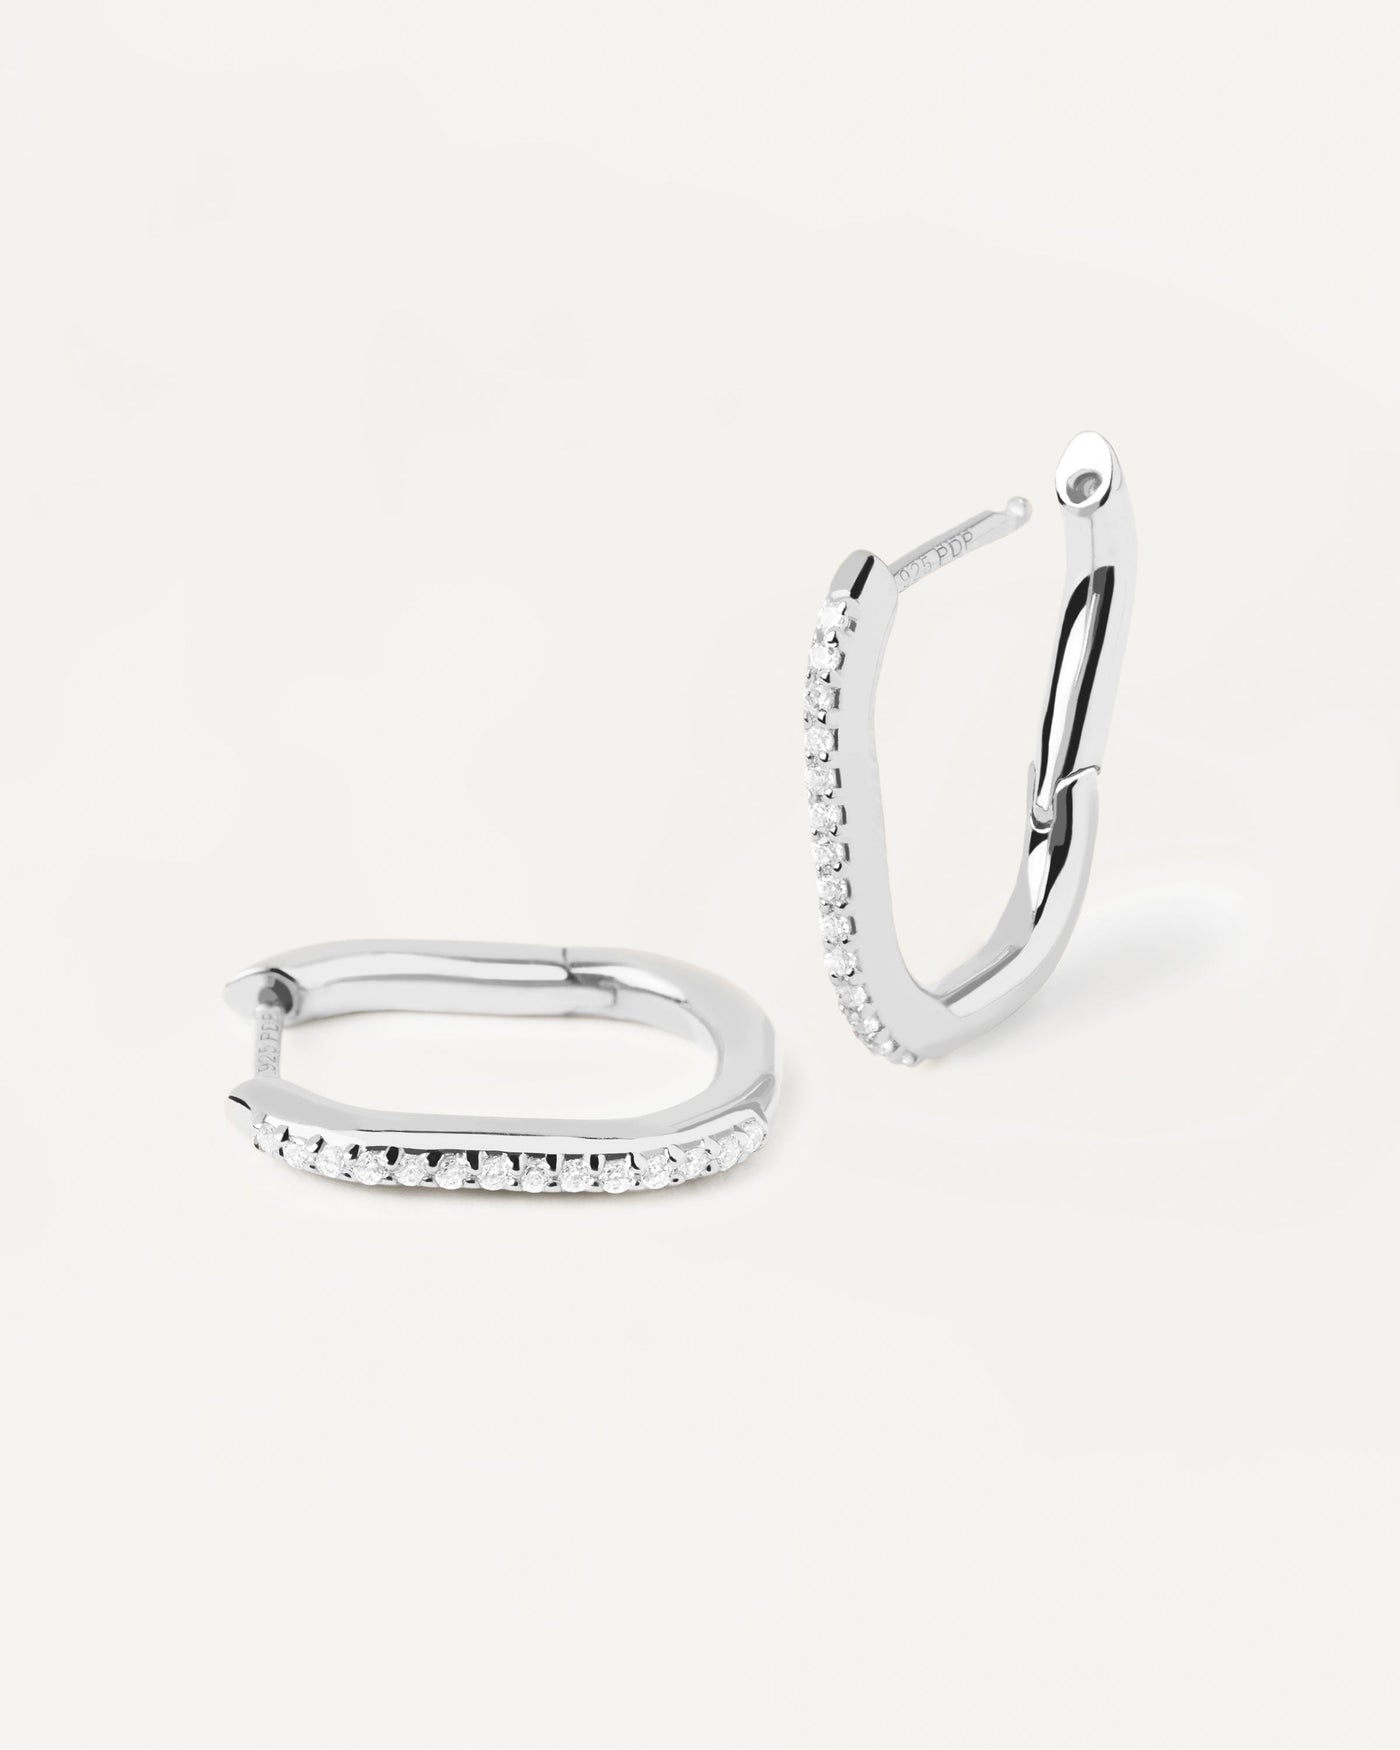 2023 Selection | Spike Silver Earrings. Oval sterling silver hoops with white zirconia. Get the latest arrival from PDPAOLA. Place your order safely and get this Best Seller. Free Shipping.